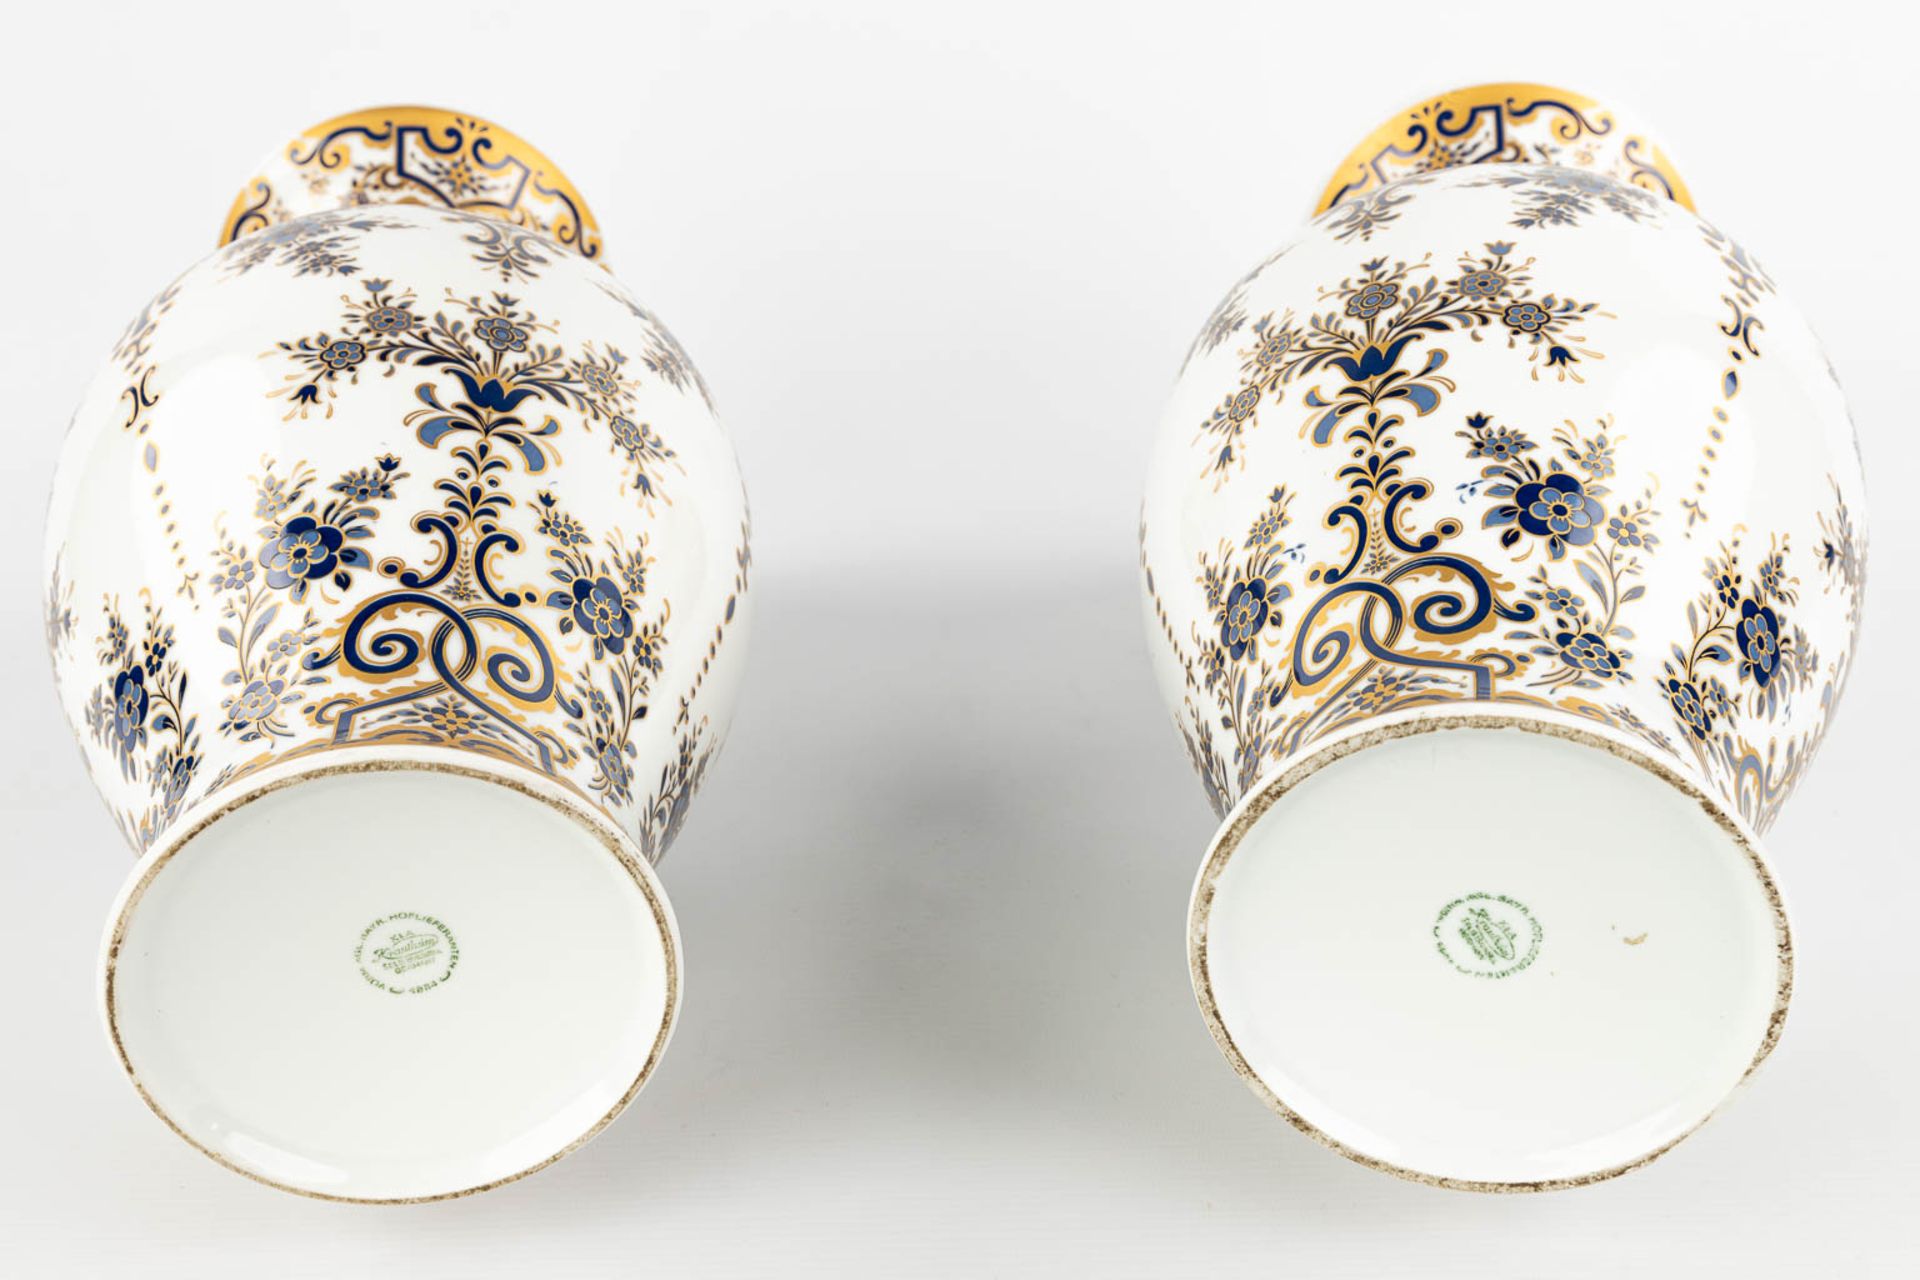 A pair of white porcelain vases with blue and gold decor marked Krautheim Bavaria and made in German - Image 7 of 13